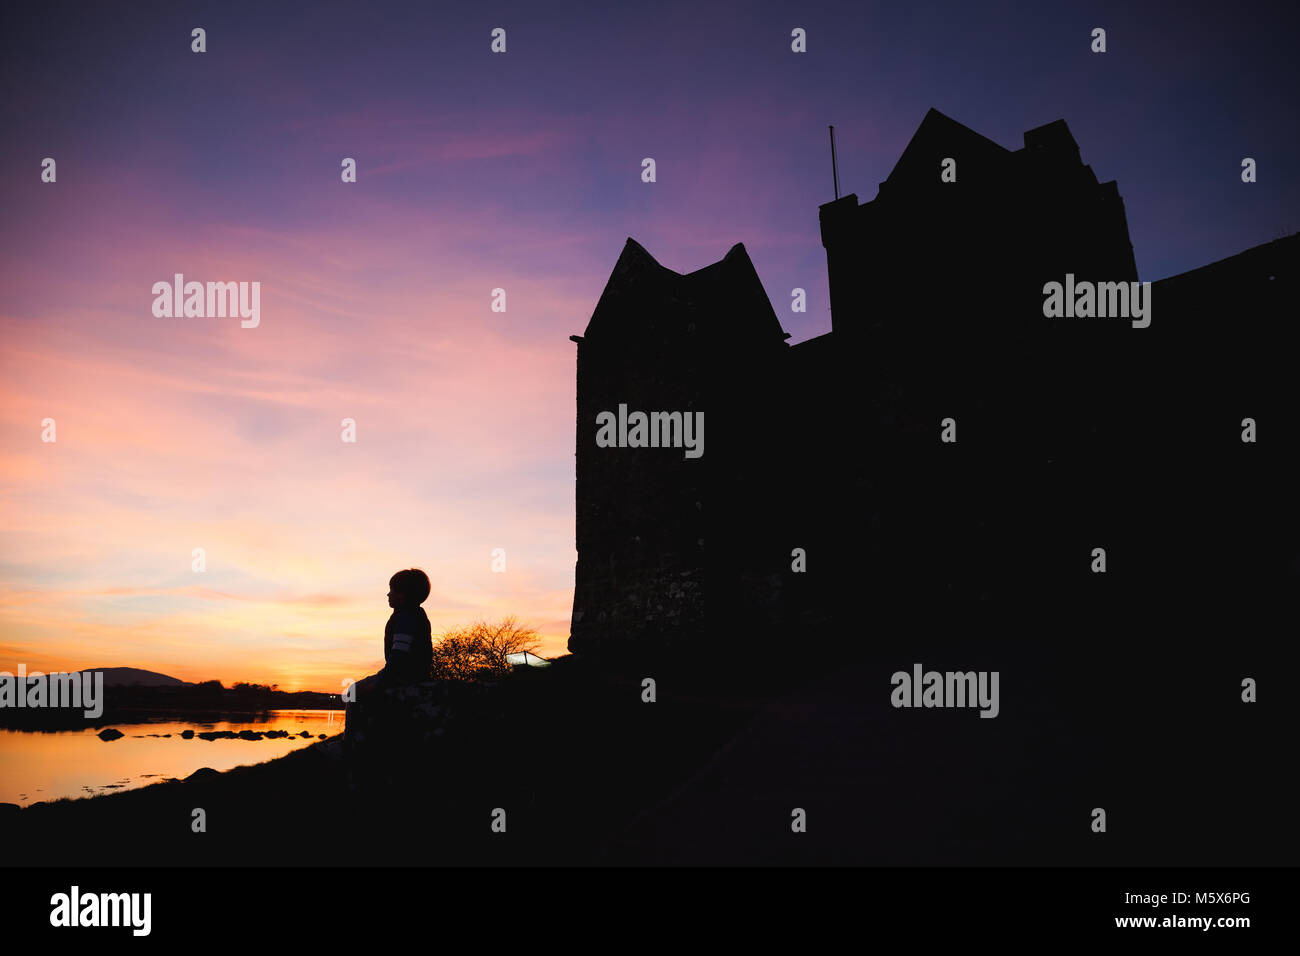 Boy looking at colorful sunset at the ocean bay with Castle siluette. Stock Photo